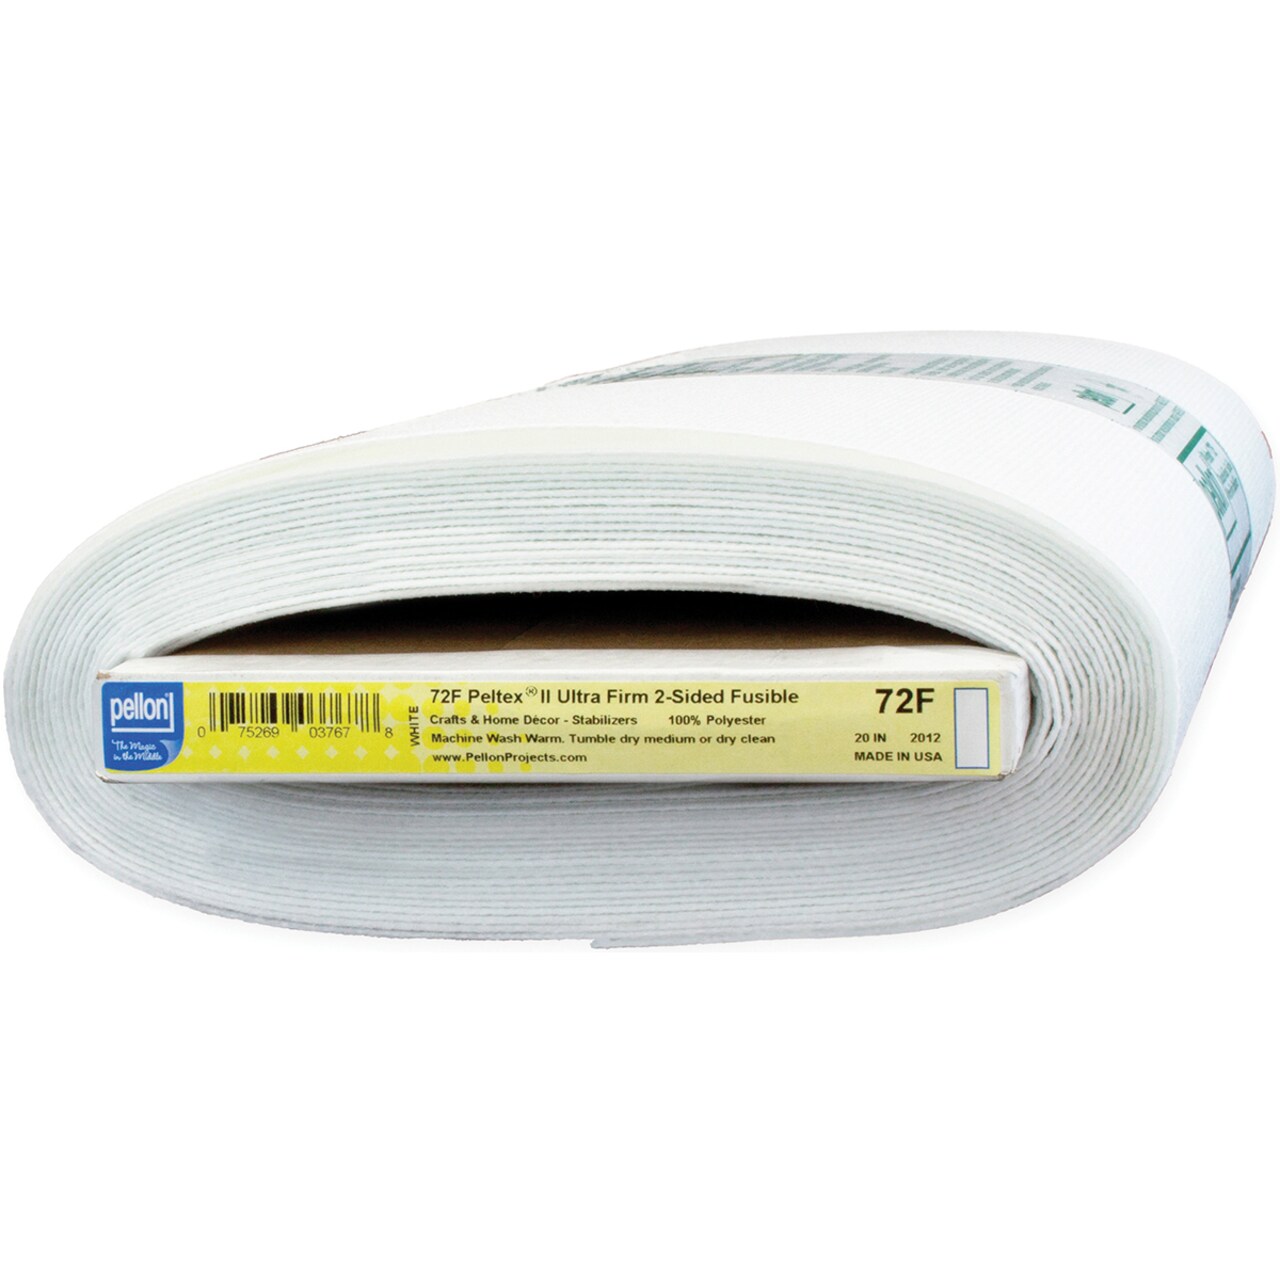 Pellon Peltex II 2-Sided Fusible Interfacing -White 20X10yd